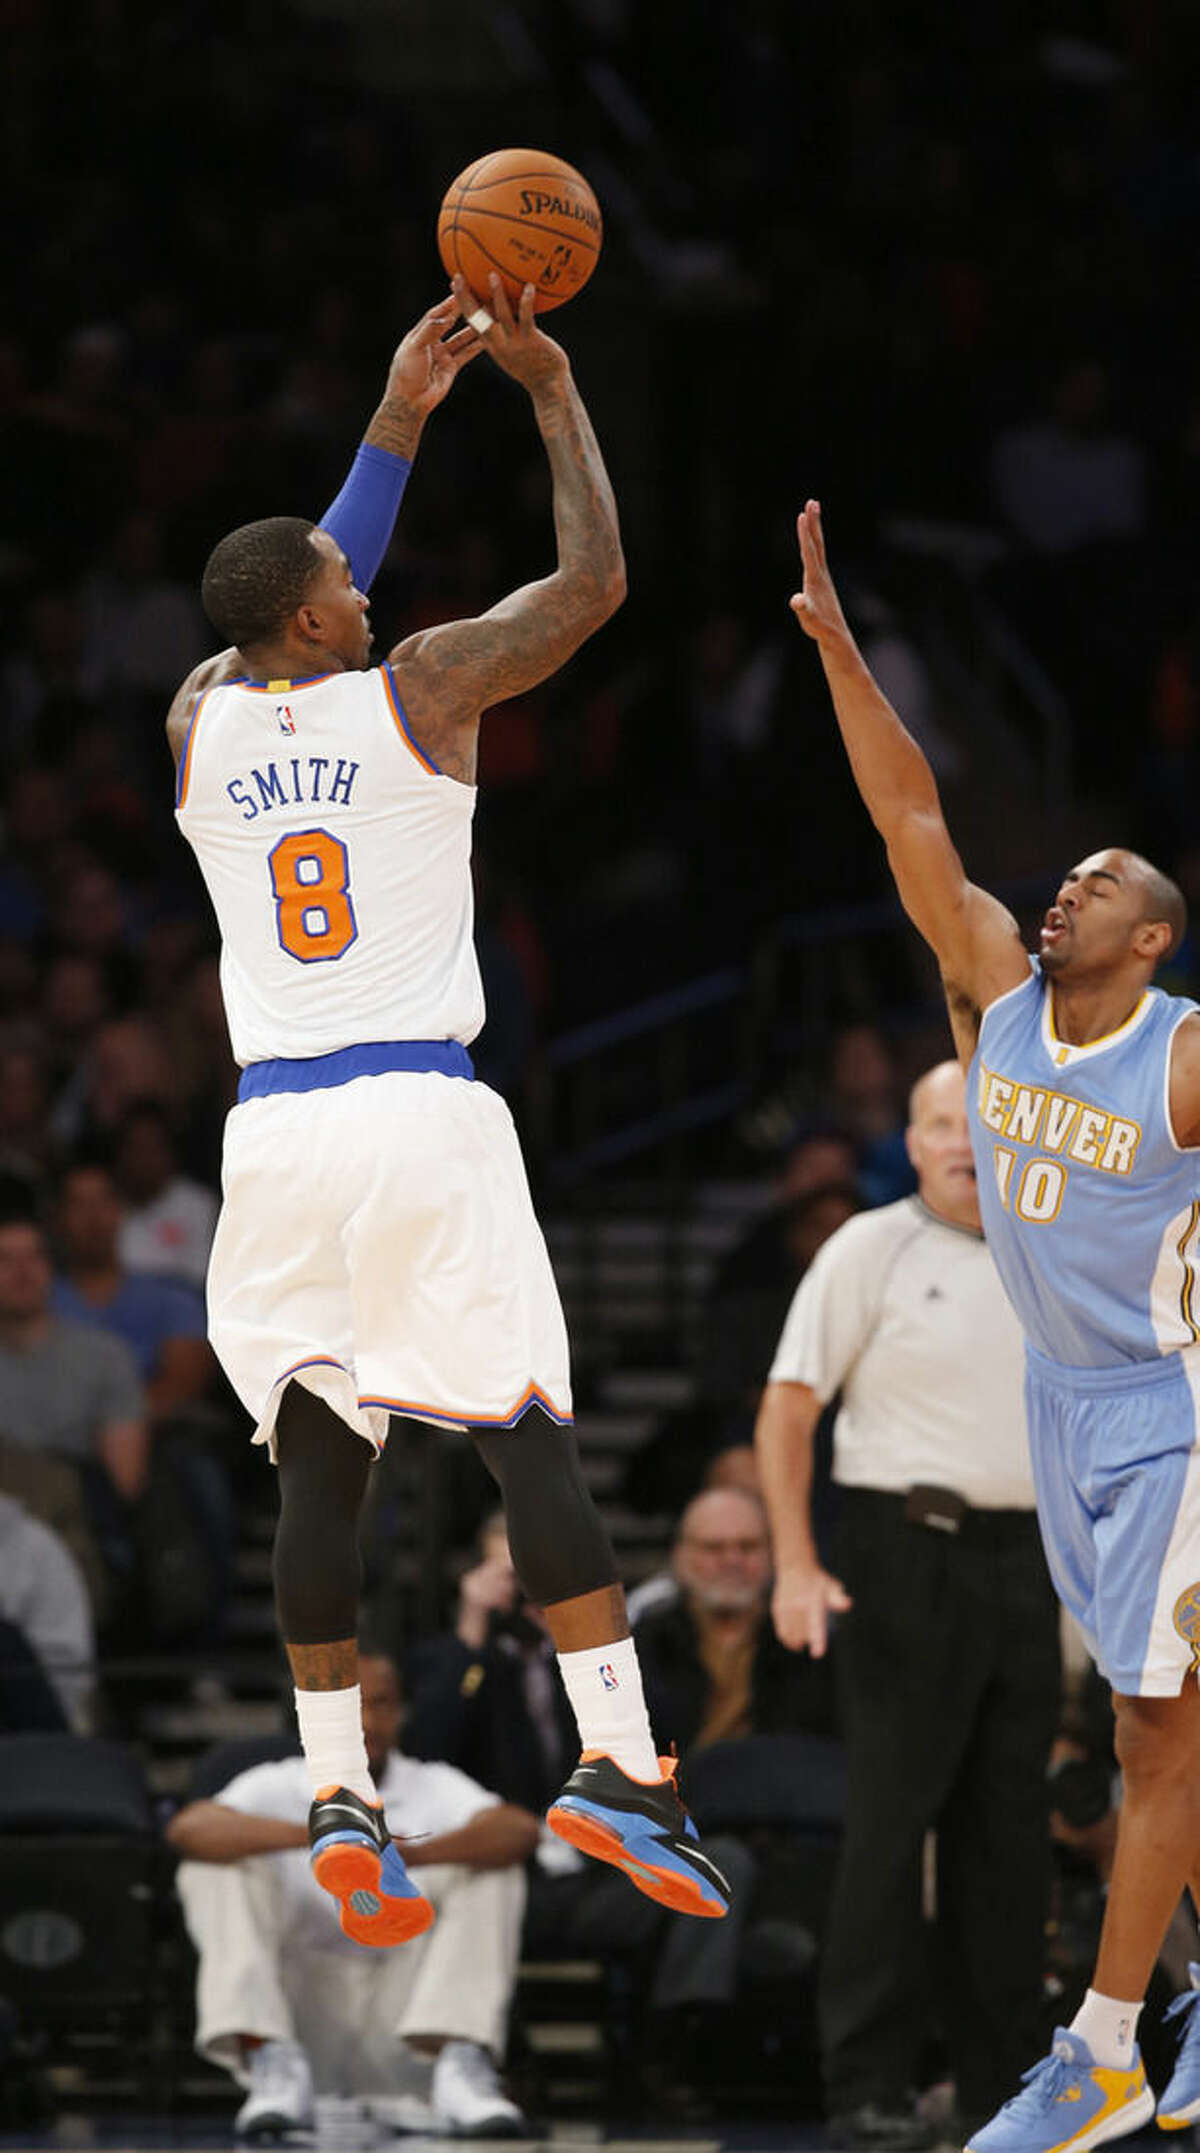 New York Knicks guard J.R. Smith (8) shoots over the defense of Denver Nuggets guard Arron Afflalo (10) in the first half of an NBA basketball game in New York, Sunday, Nov. 16, 2014. (AP Photo/Kathy Willens)